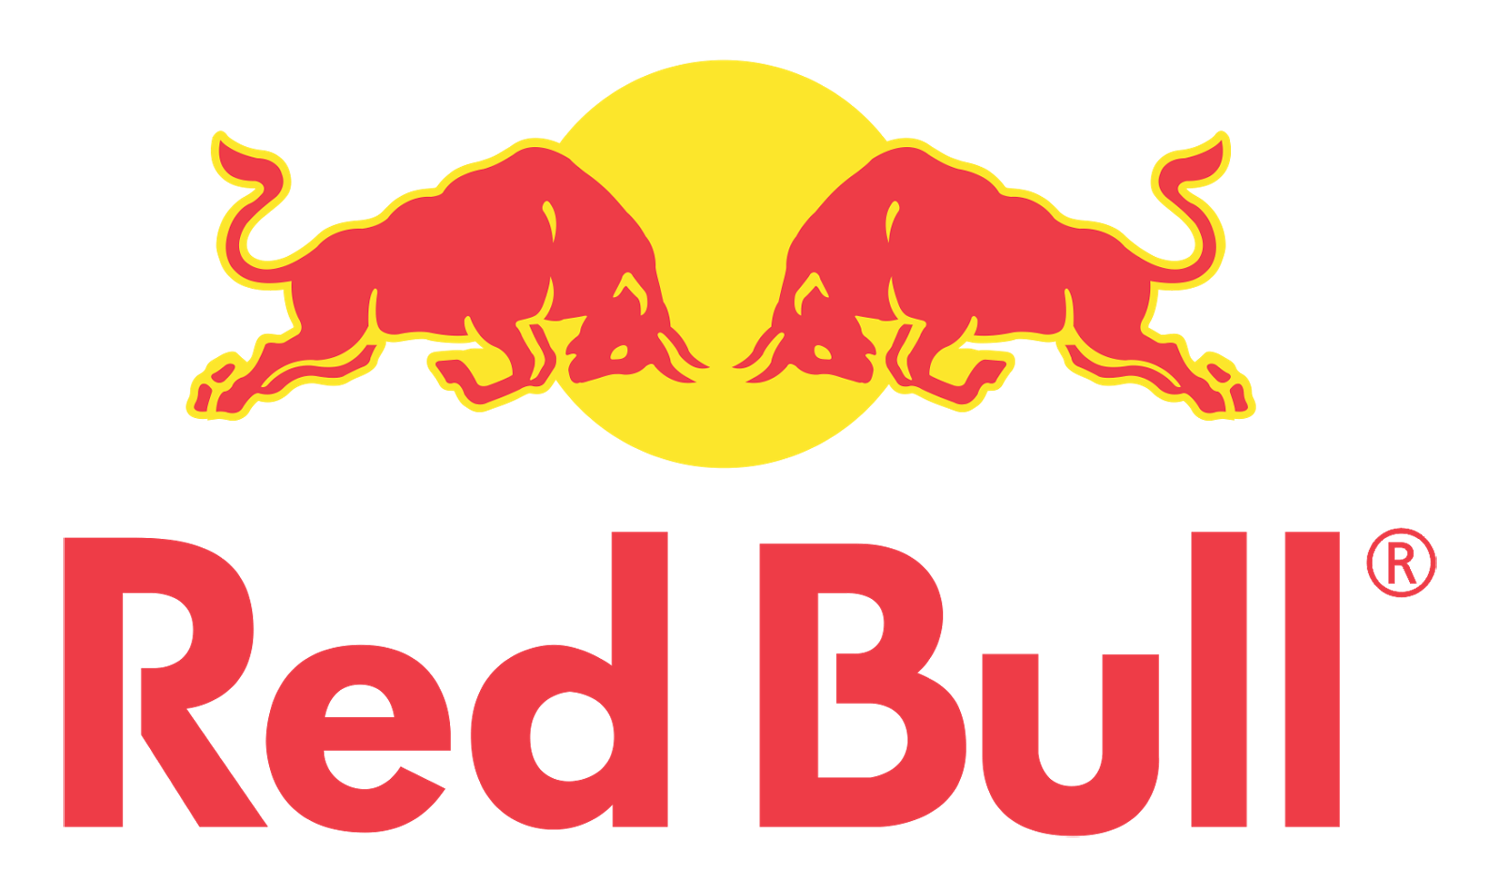 Popular Red Logo - Red Bull Logo, Red Bull Symbol, Meaning, History and Evolution